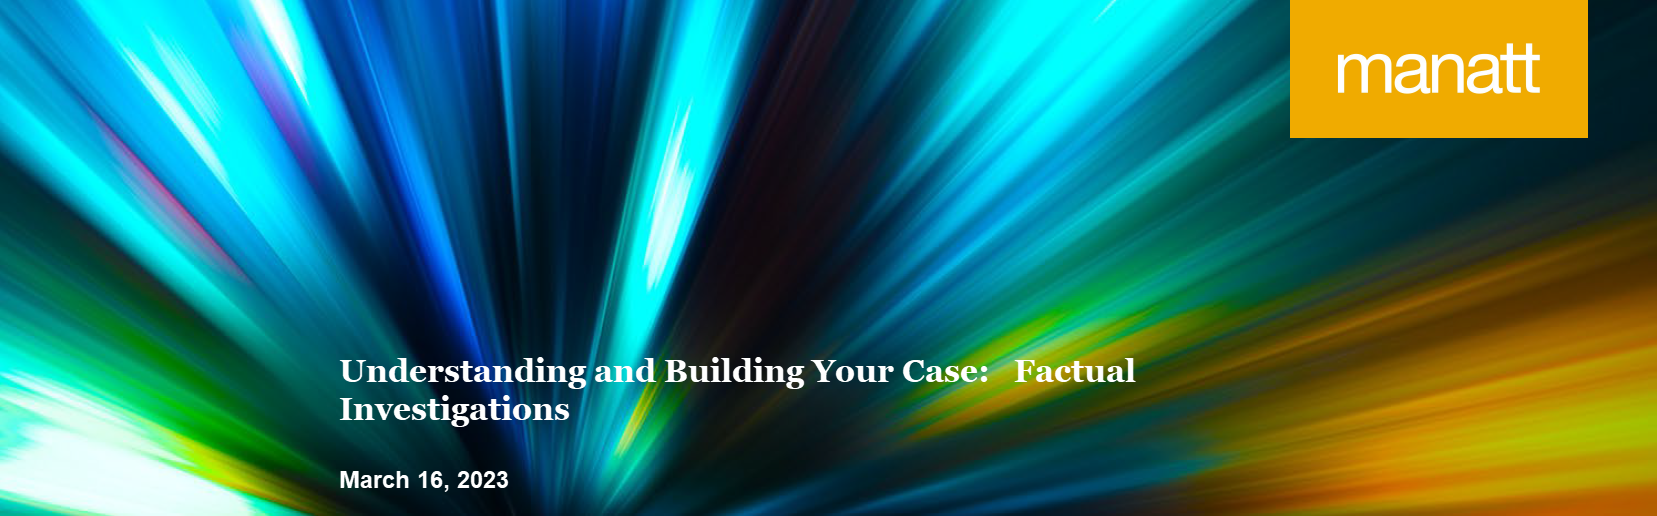 Understanding and Building Your Case: Factual Investigations